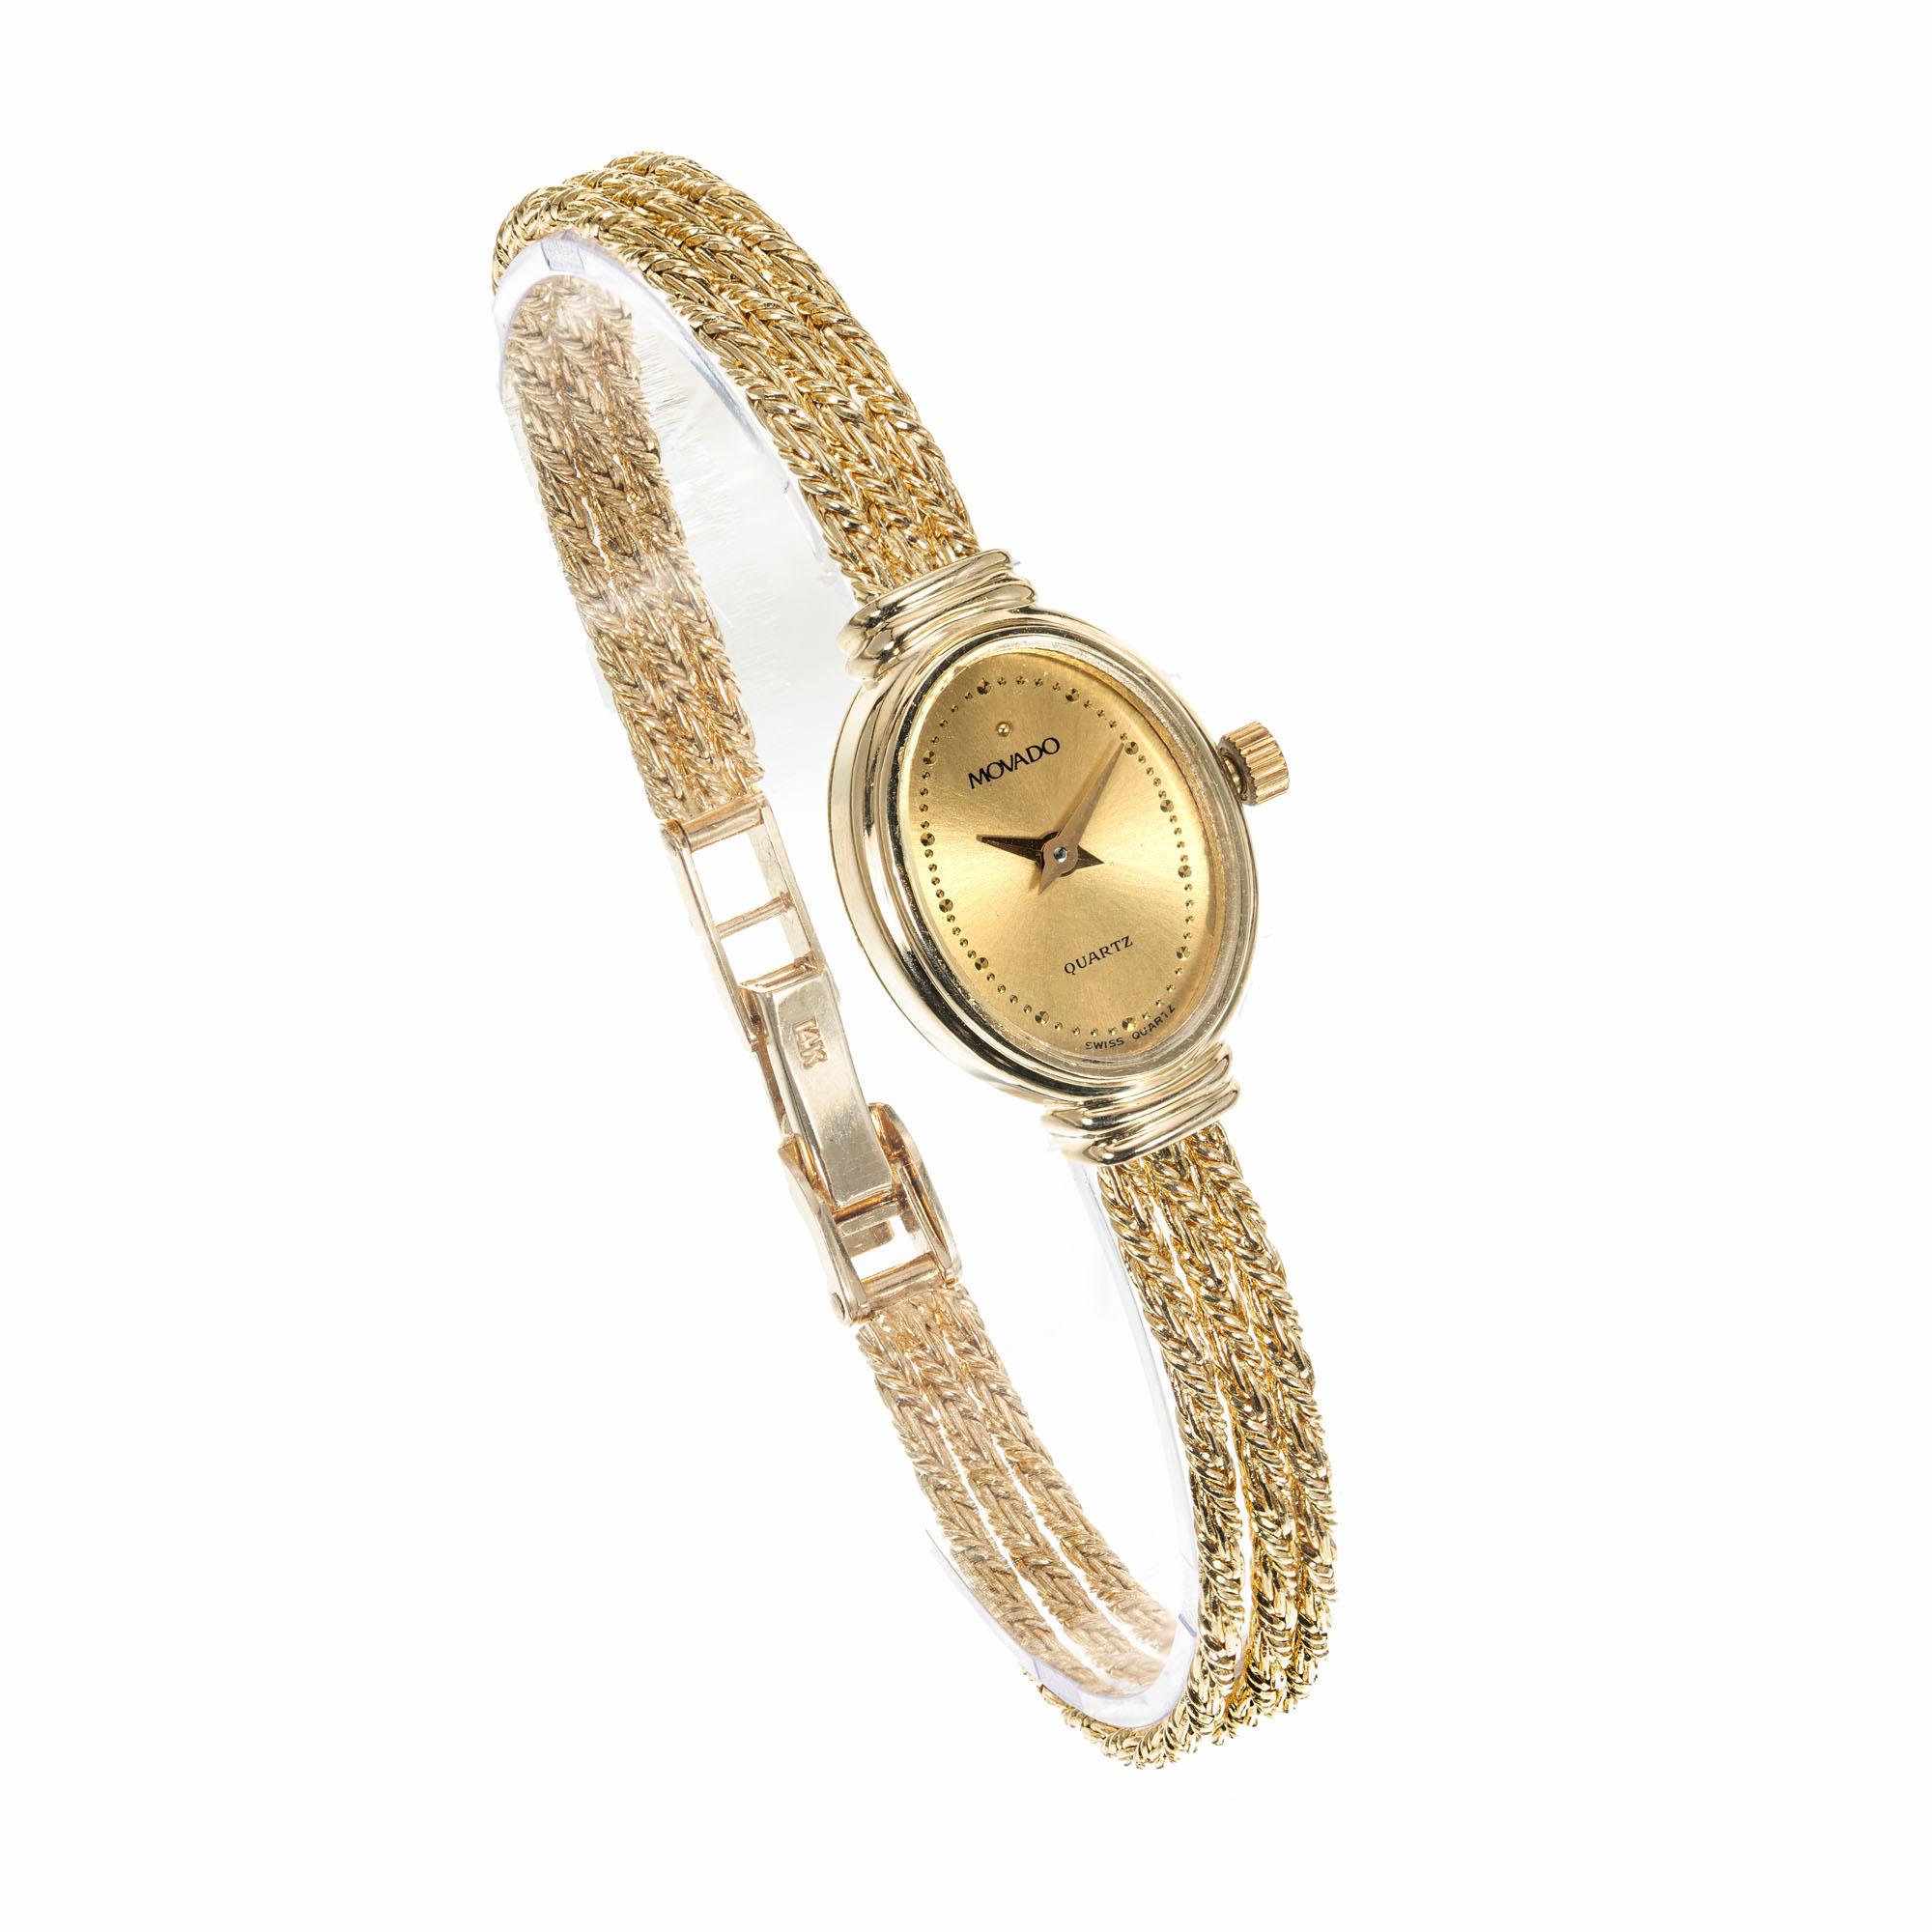 Ladies oval Movado solid 14k gold wristwatch with gold three strand Movado bracelet. Quartz movement 

Length: 22.70nn
Width: 15.10mm
Band width at case: 5.32mm
Case thickness: 5.16mm
Band: Three strand gold chain stamped: M 14k
Crystal: